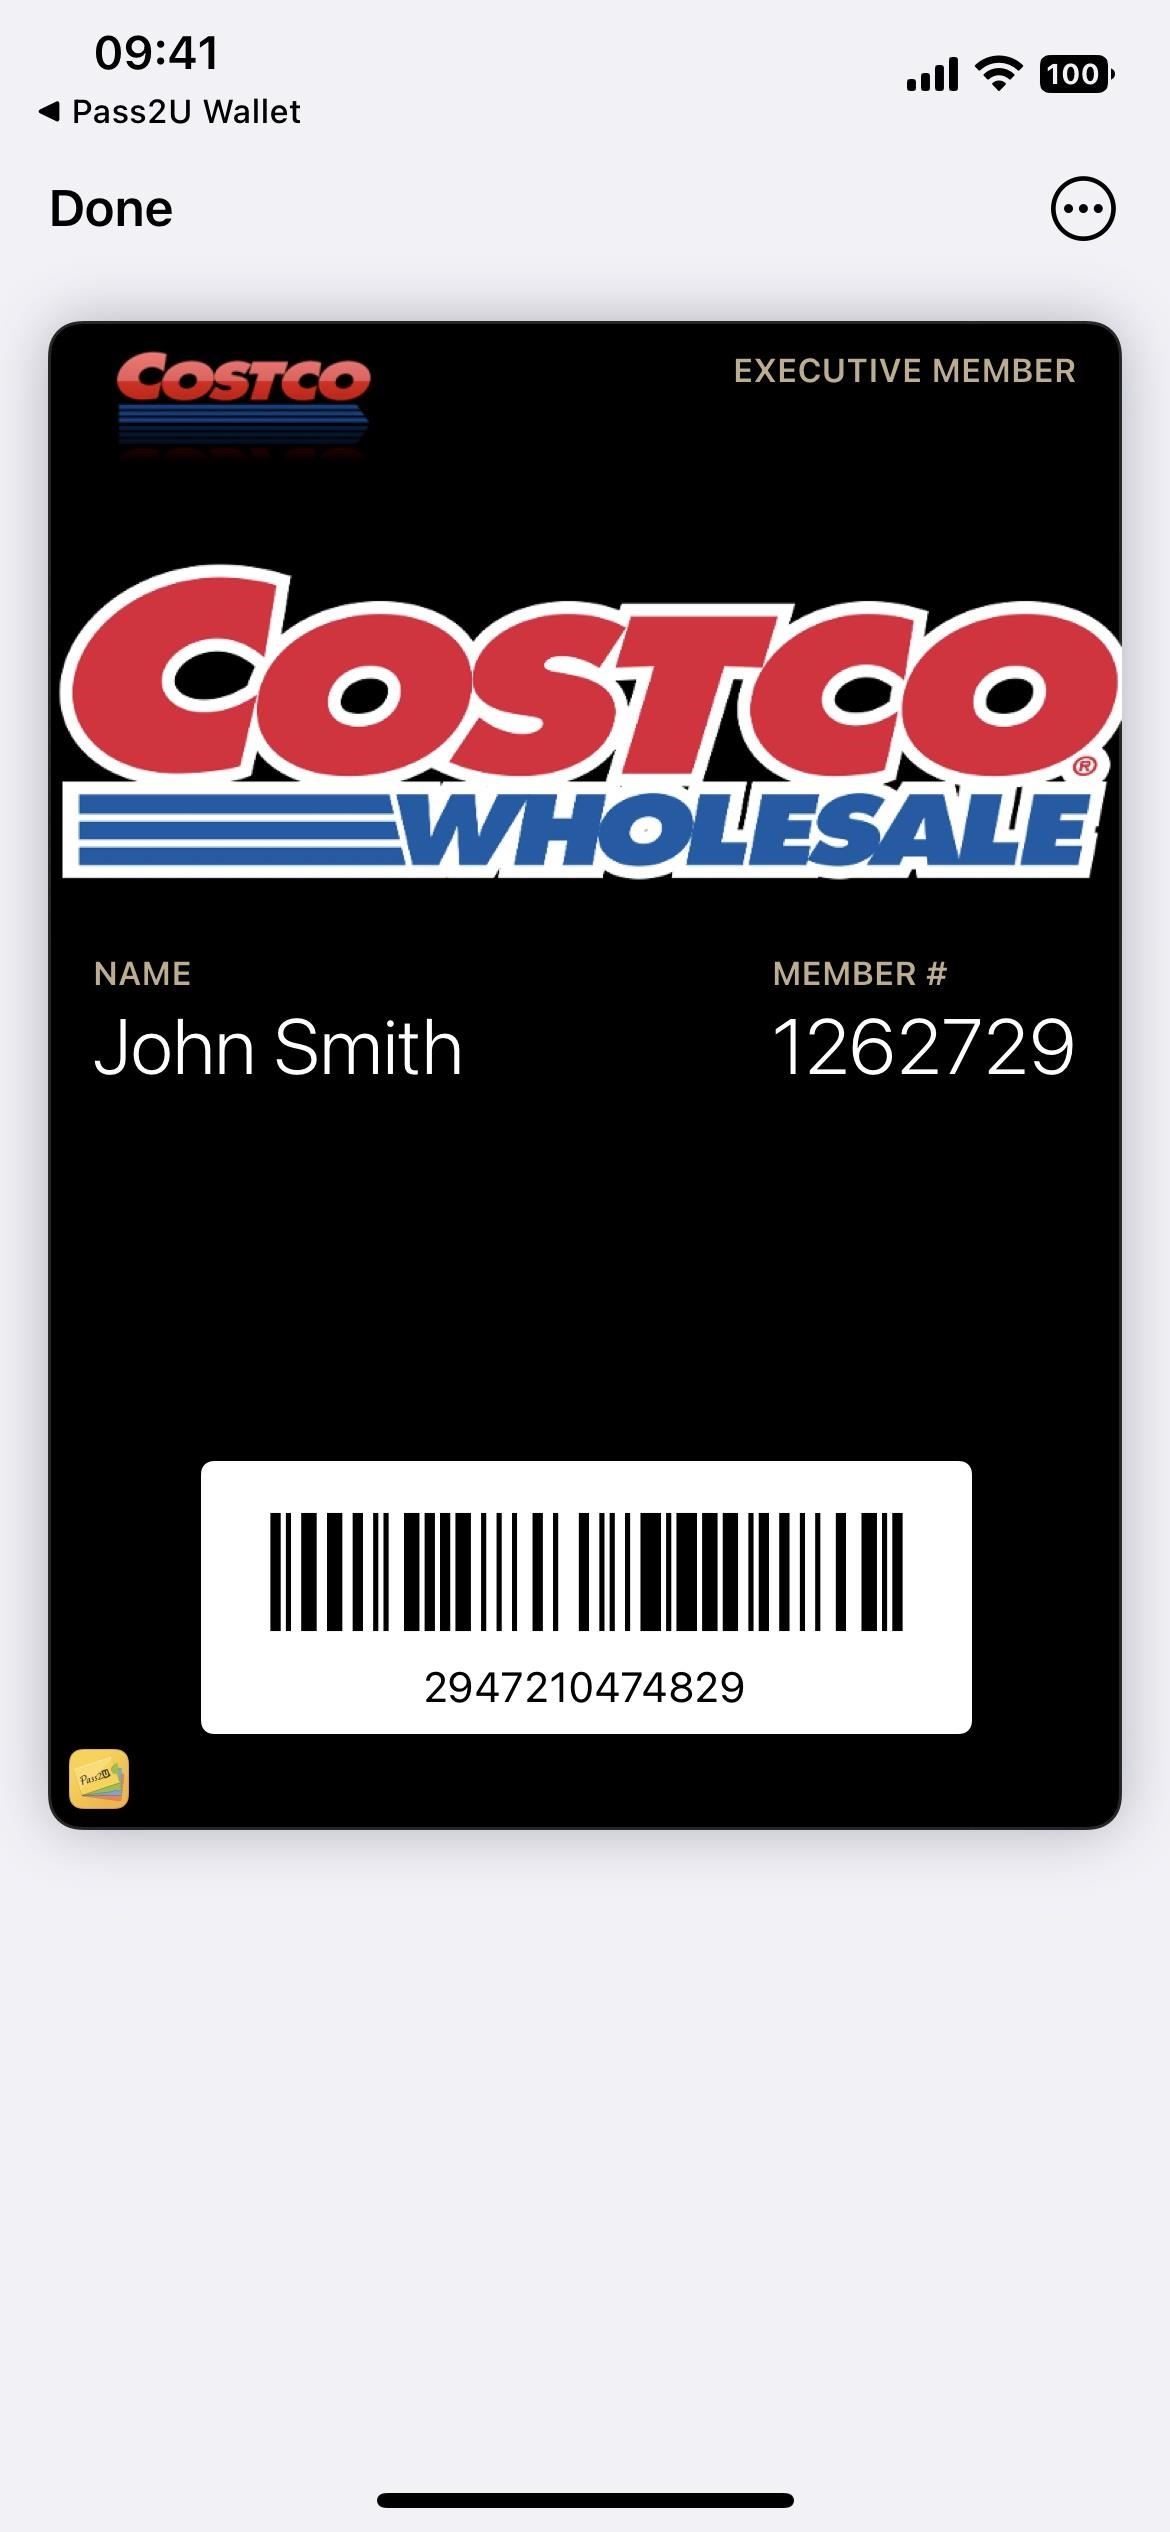 How to Add Unsupported Cards and Passes to Apple Wallet for Quick, Easy Access on Your iPhone